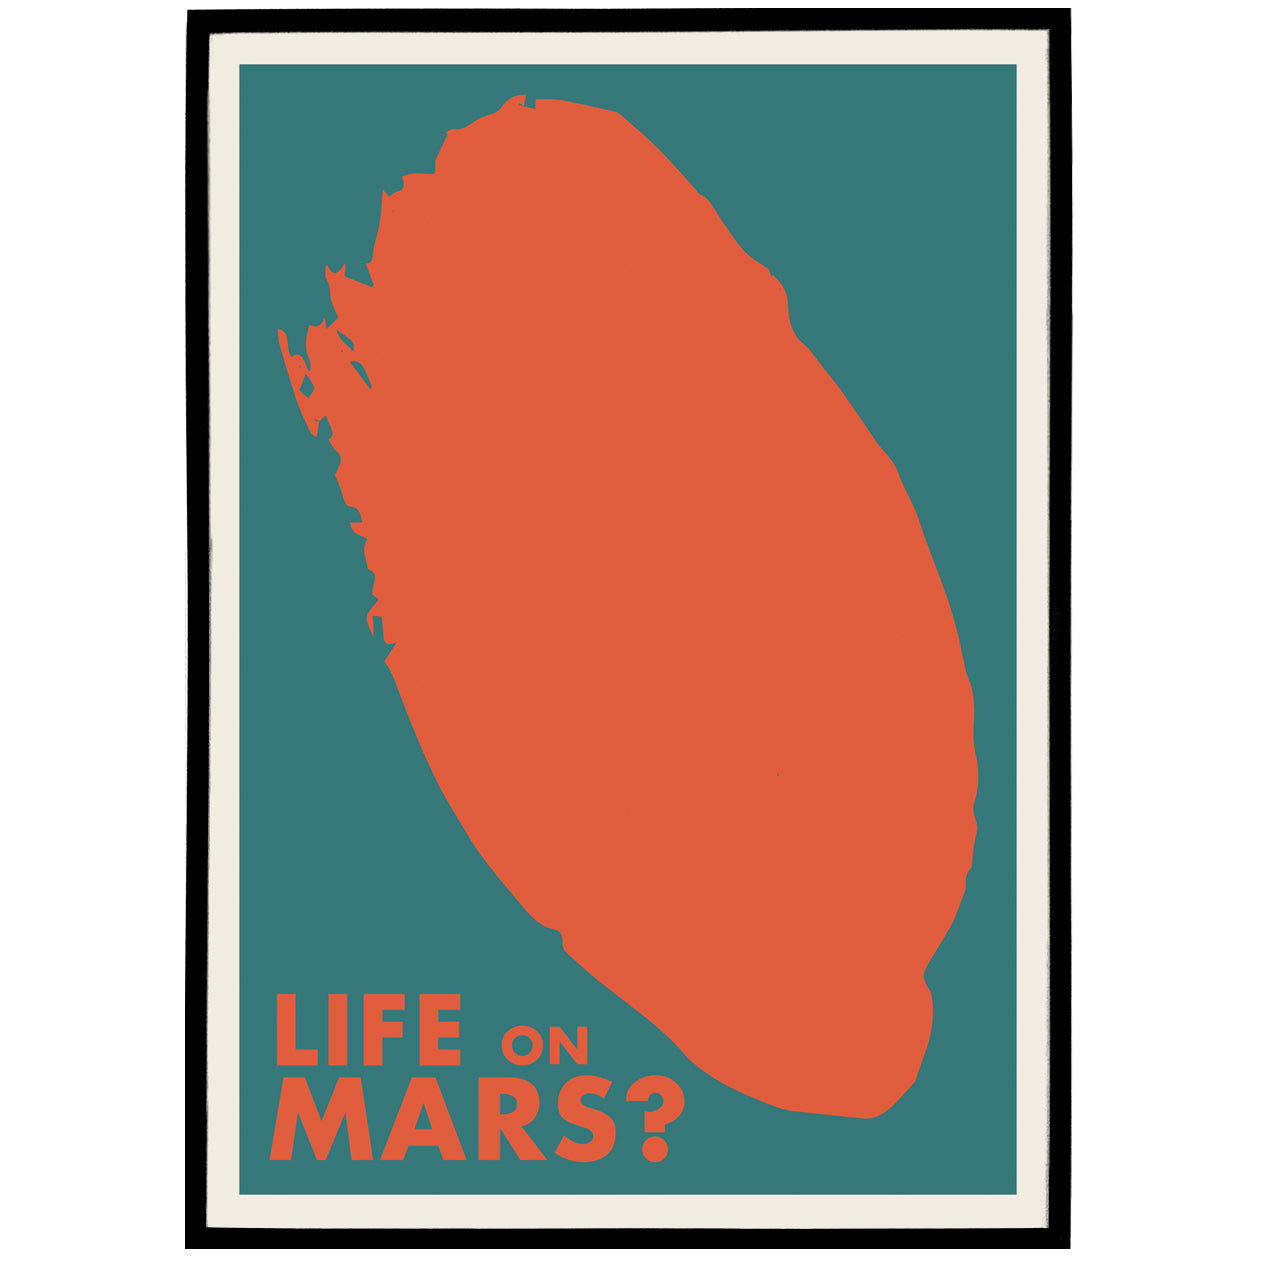 Life on Mars?, Bowie Poster